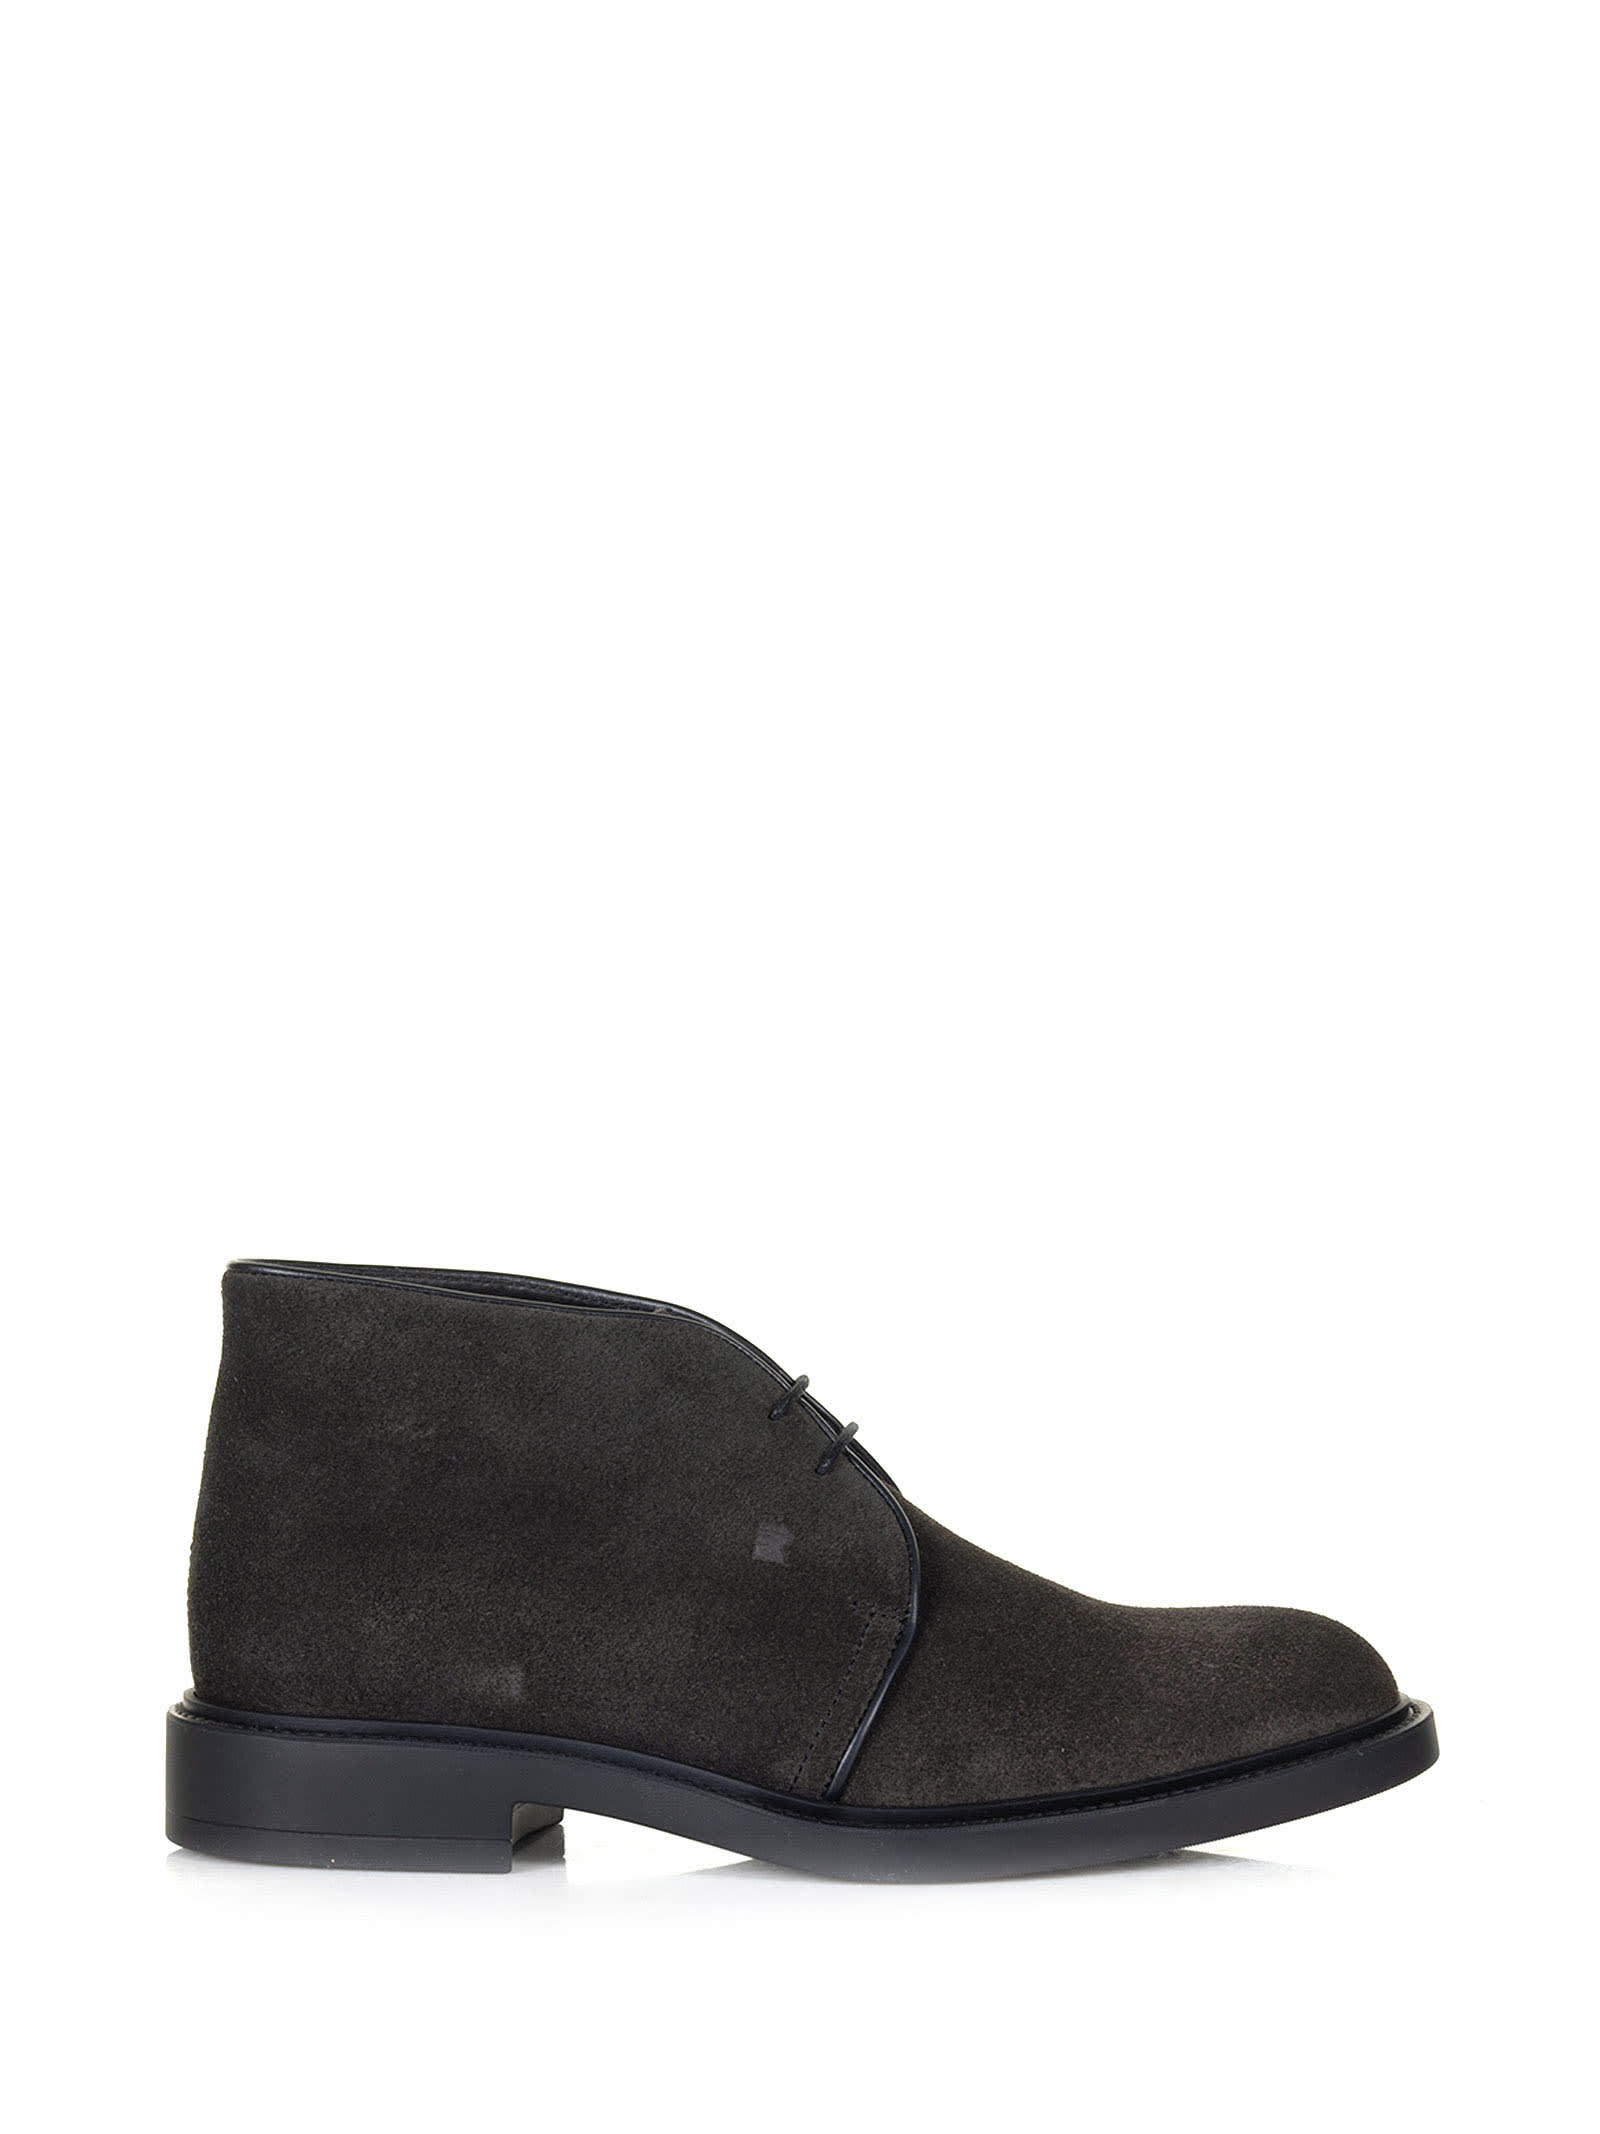 Anthracite Suede Ankle Boot